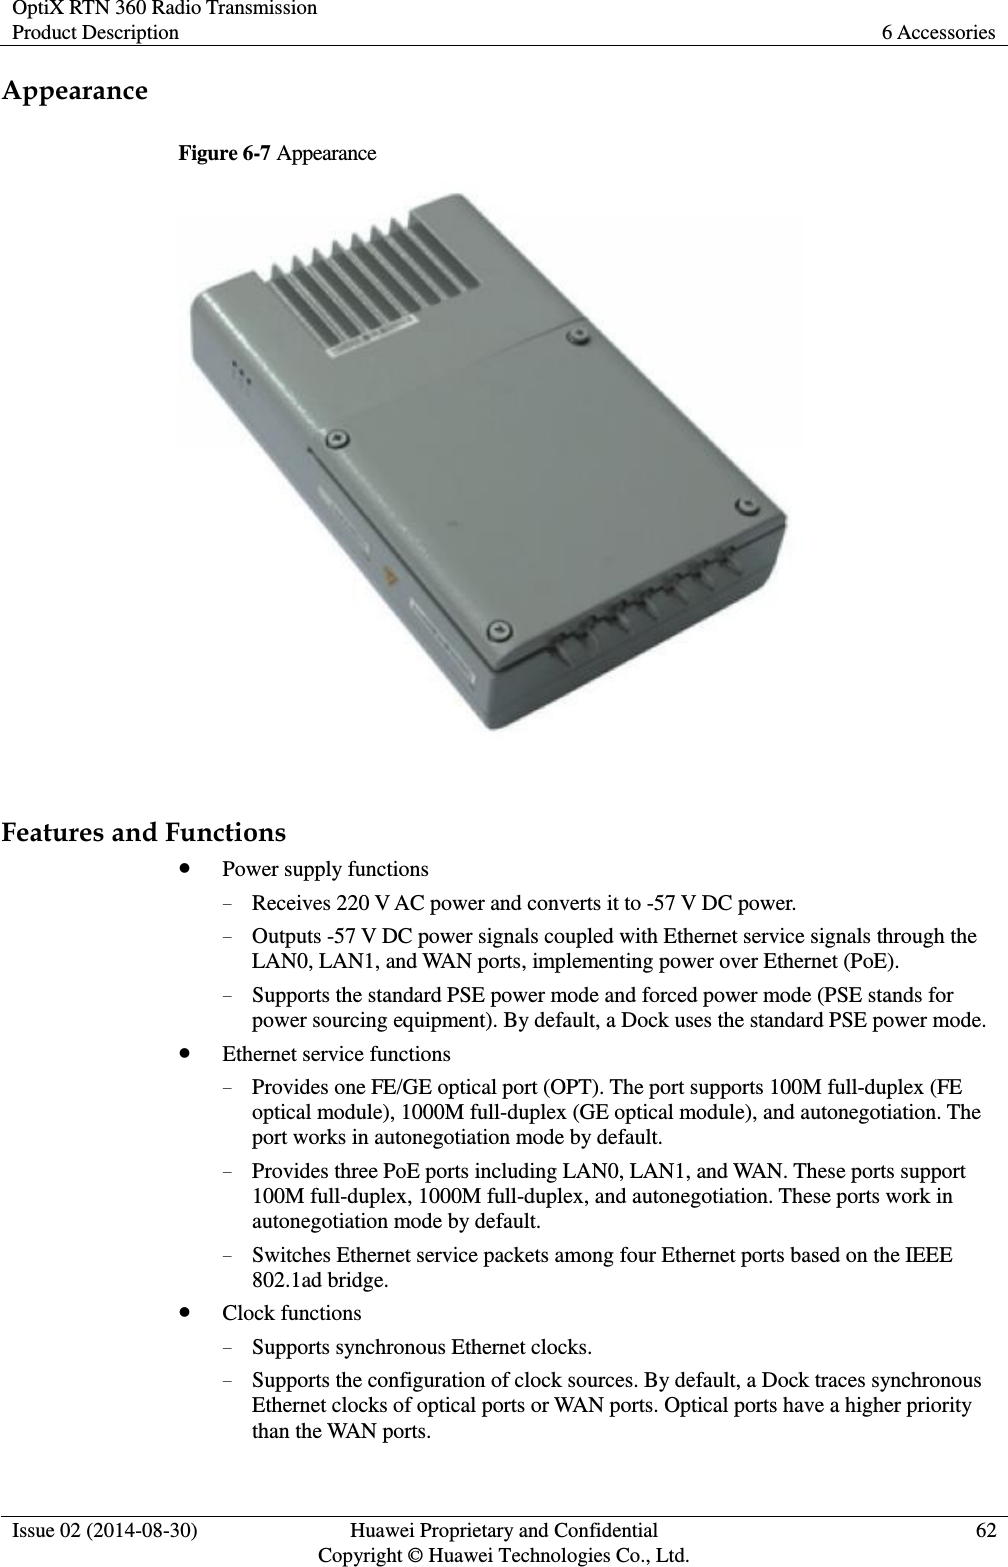 OptiX RTN 360 Radio Transmission Product Description 6 Accessories  Issue 02 (2014-08-30) Huawei Proprietary and Confidential                                     Copyright © Huawei Technologies Co., Ltd. 62  Appearance Figure 6-7 Appearance   Features and Functions  Power supply functions − Receives 220 V AC power and converts it to -57 V DC power. − Outputs -57 V DC power signals coupled with Ethernet service signals through the LAN0, LAN1, and WAN ports, implementing power over Ethernet (PoE). − Supports the standard PSE power mode and forced power mode (PSE stands for power sourcing equipment). By default, a Dock uses the standard PSE power mode.  Ethernet service functions − Provides one FE/GE optical port (OPT). The port supports 100M full-duplex (FE optical module), 1000M full-duplex (GE optical module), and autonegotiation. The port works in autonegotiation mode by default. − Provides three PoE ports including LAN0, LAN1, and WAN. These ports support 100M full-duplex, 1000M full-duplex, and autonegotiation. These ports work in autonegotiation mode by default. − Switches Ethernet service packets among four Ethernet ports based on the IEEE 802.1ad bridge.  Clock functions − Supports synchronous Ethernet clocks. − Supports the configuration of clock sources. By default, a Dock traces synchronous Ethernet clocks of optical ports or WAN ports. Optical ports have a higher priority than the WAN ports. 